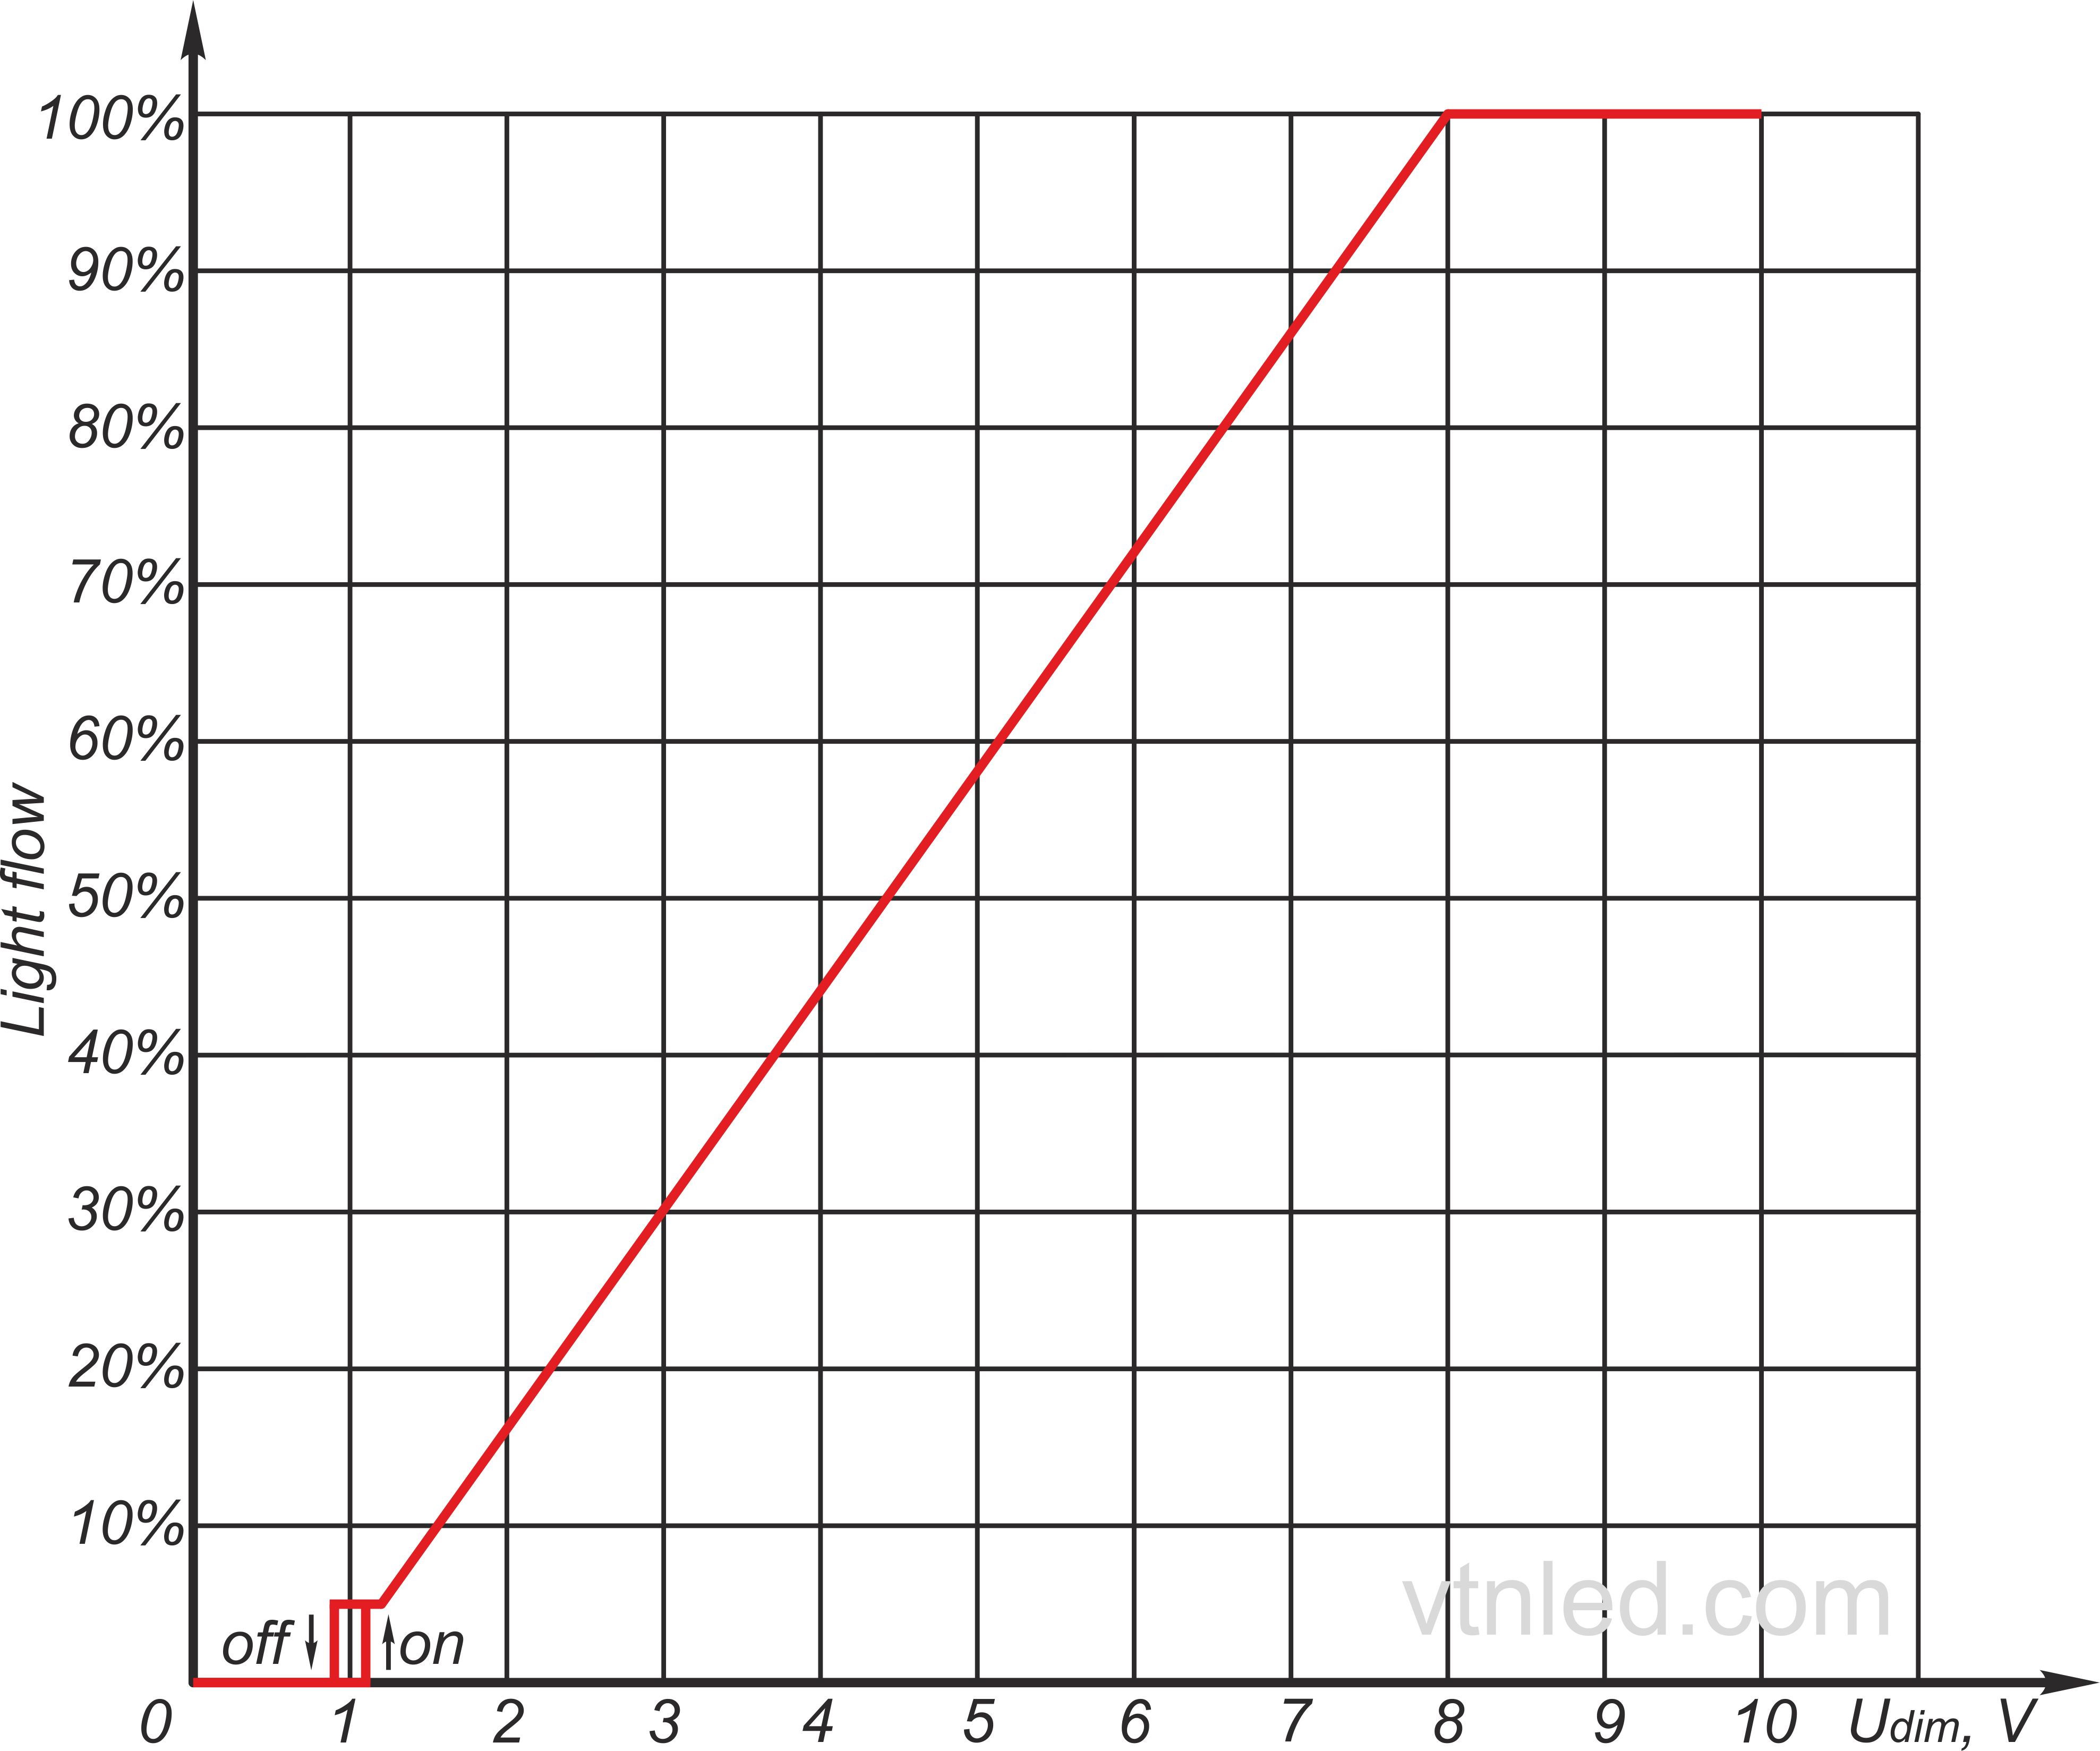 The graph of the dependence of the light flux level on the control voltage